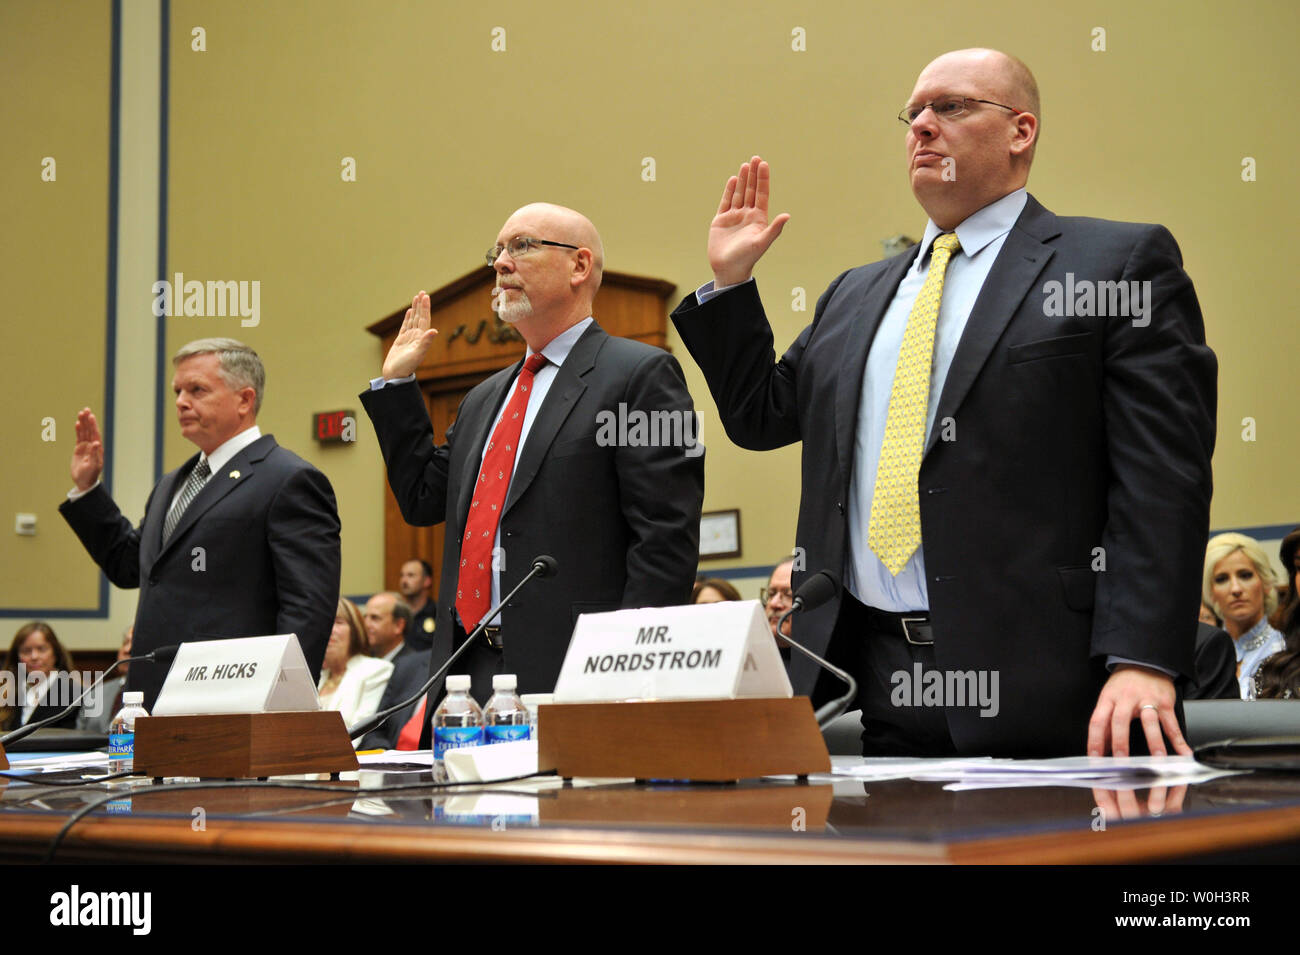 From left to right, Mark Thompson, Acting Deputy Assistant Secretary for Counterterrorism at the Department of State, Gregory Hicks, Foreign Service Officer and former Deputy Chief of Mission in Libya, Eric Nordstrom, Diplomatic Security Officer and former Regional Security Officer in Libya, are sworn in prior to a House Oversight and Governmental Reform Committee hearing on the terrorist attacks on the diplomatic compound in Benghazi, on Capitol Hill on May 8, 2013 in Washington, D.C. UPI/Kevin Dietsch Stock Photo